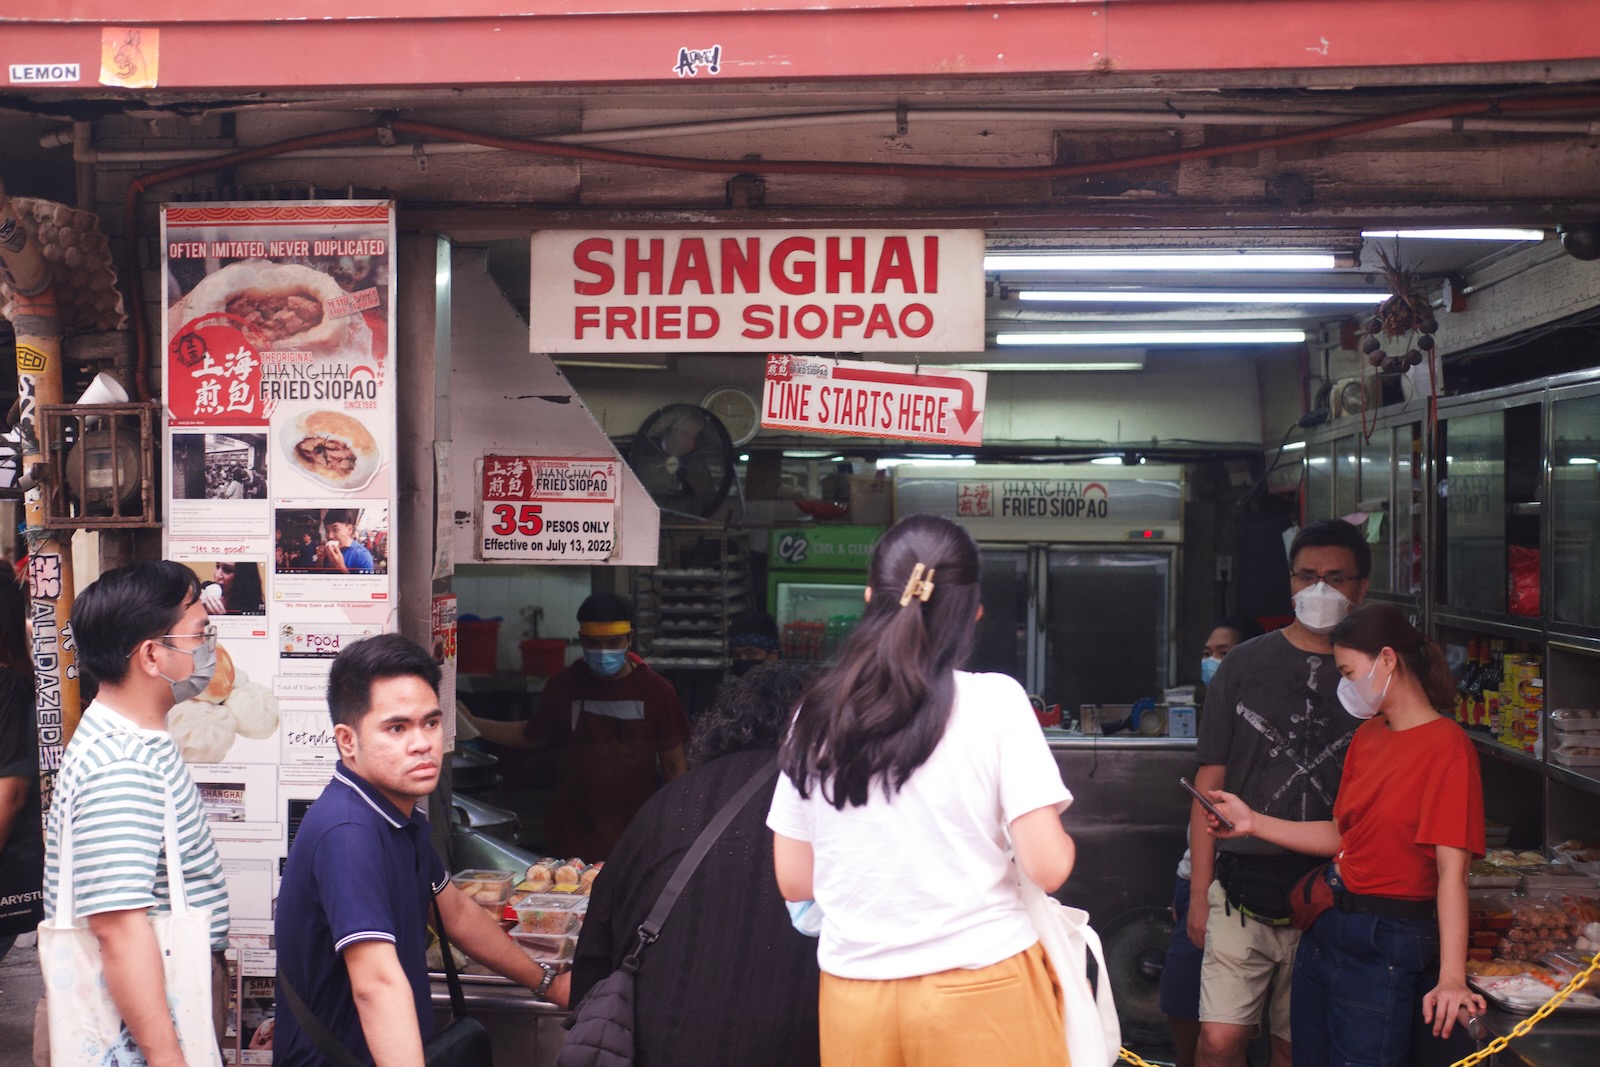 A small lunch stand advertises Shanghai fried siopao.